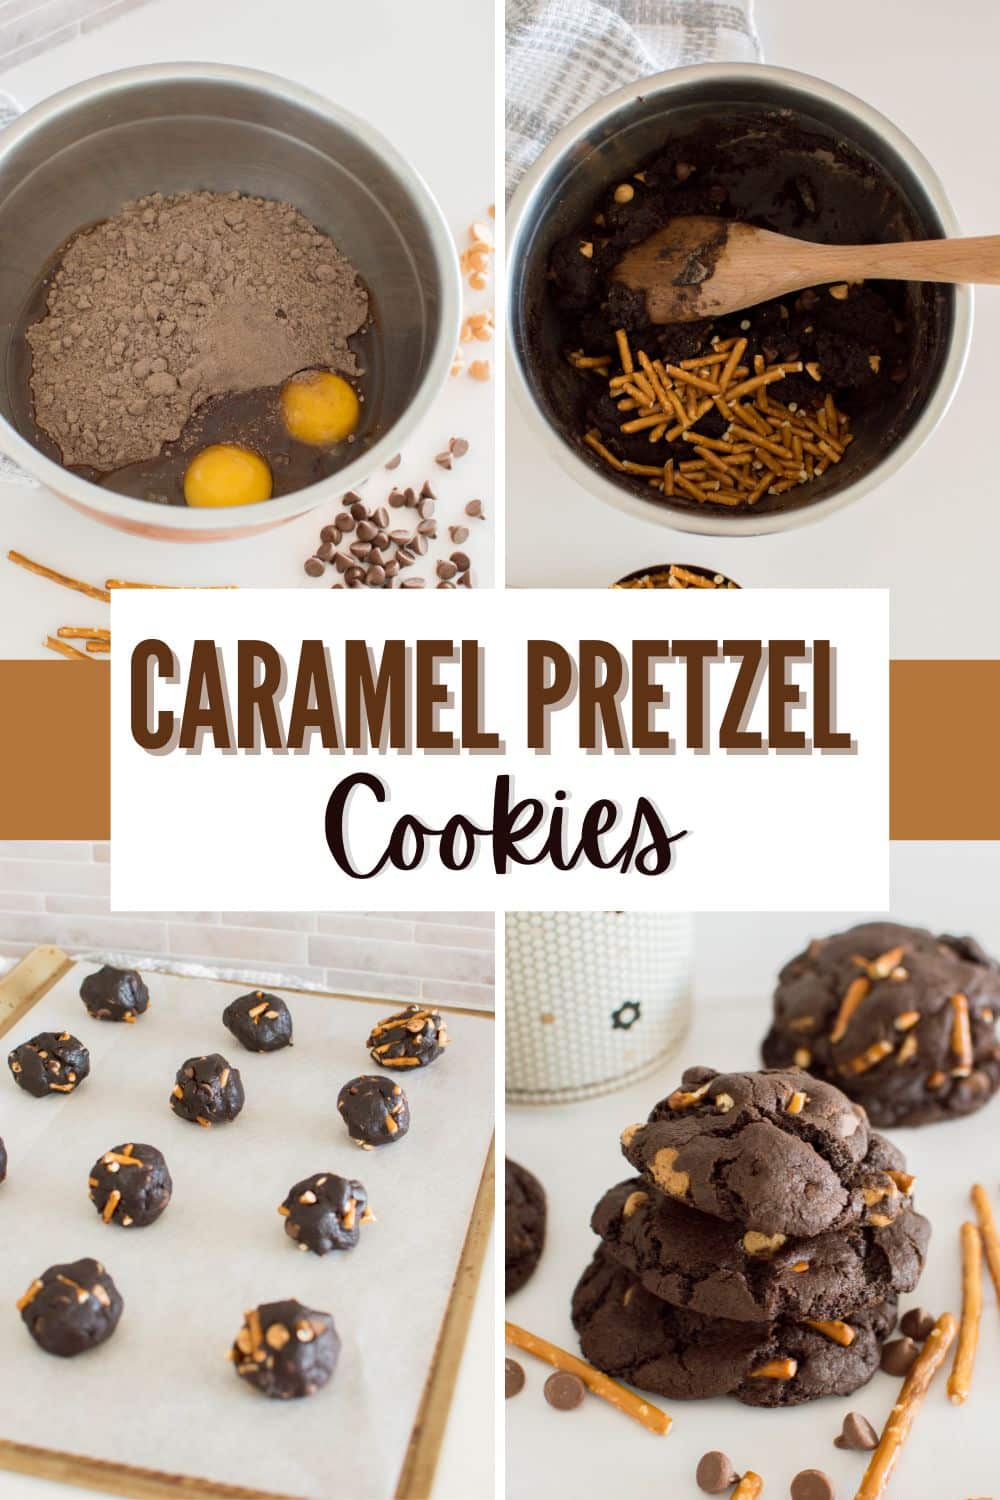 Caramel Pretzel Cookies combine the sweet and salty flavors of caramel and pretzels to create a delectable treat. These cookies are irresistible with their gooey caramel center and crunchy pretzel bits